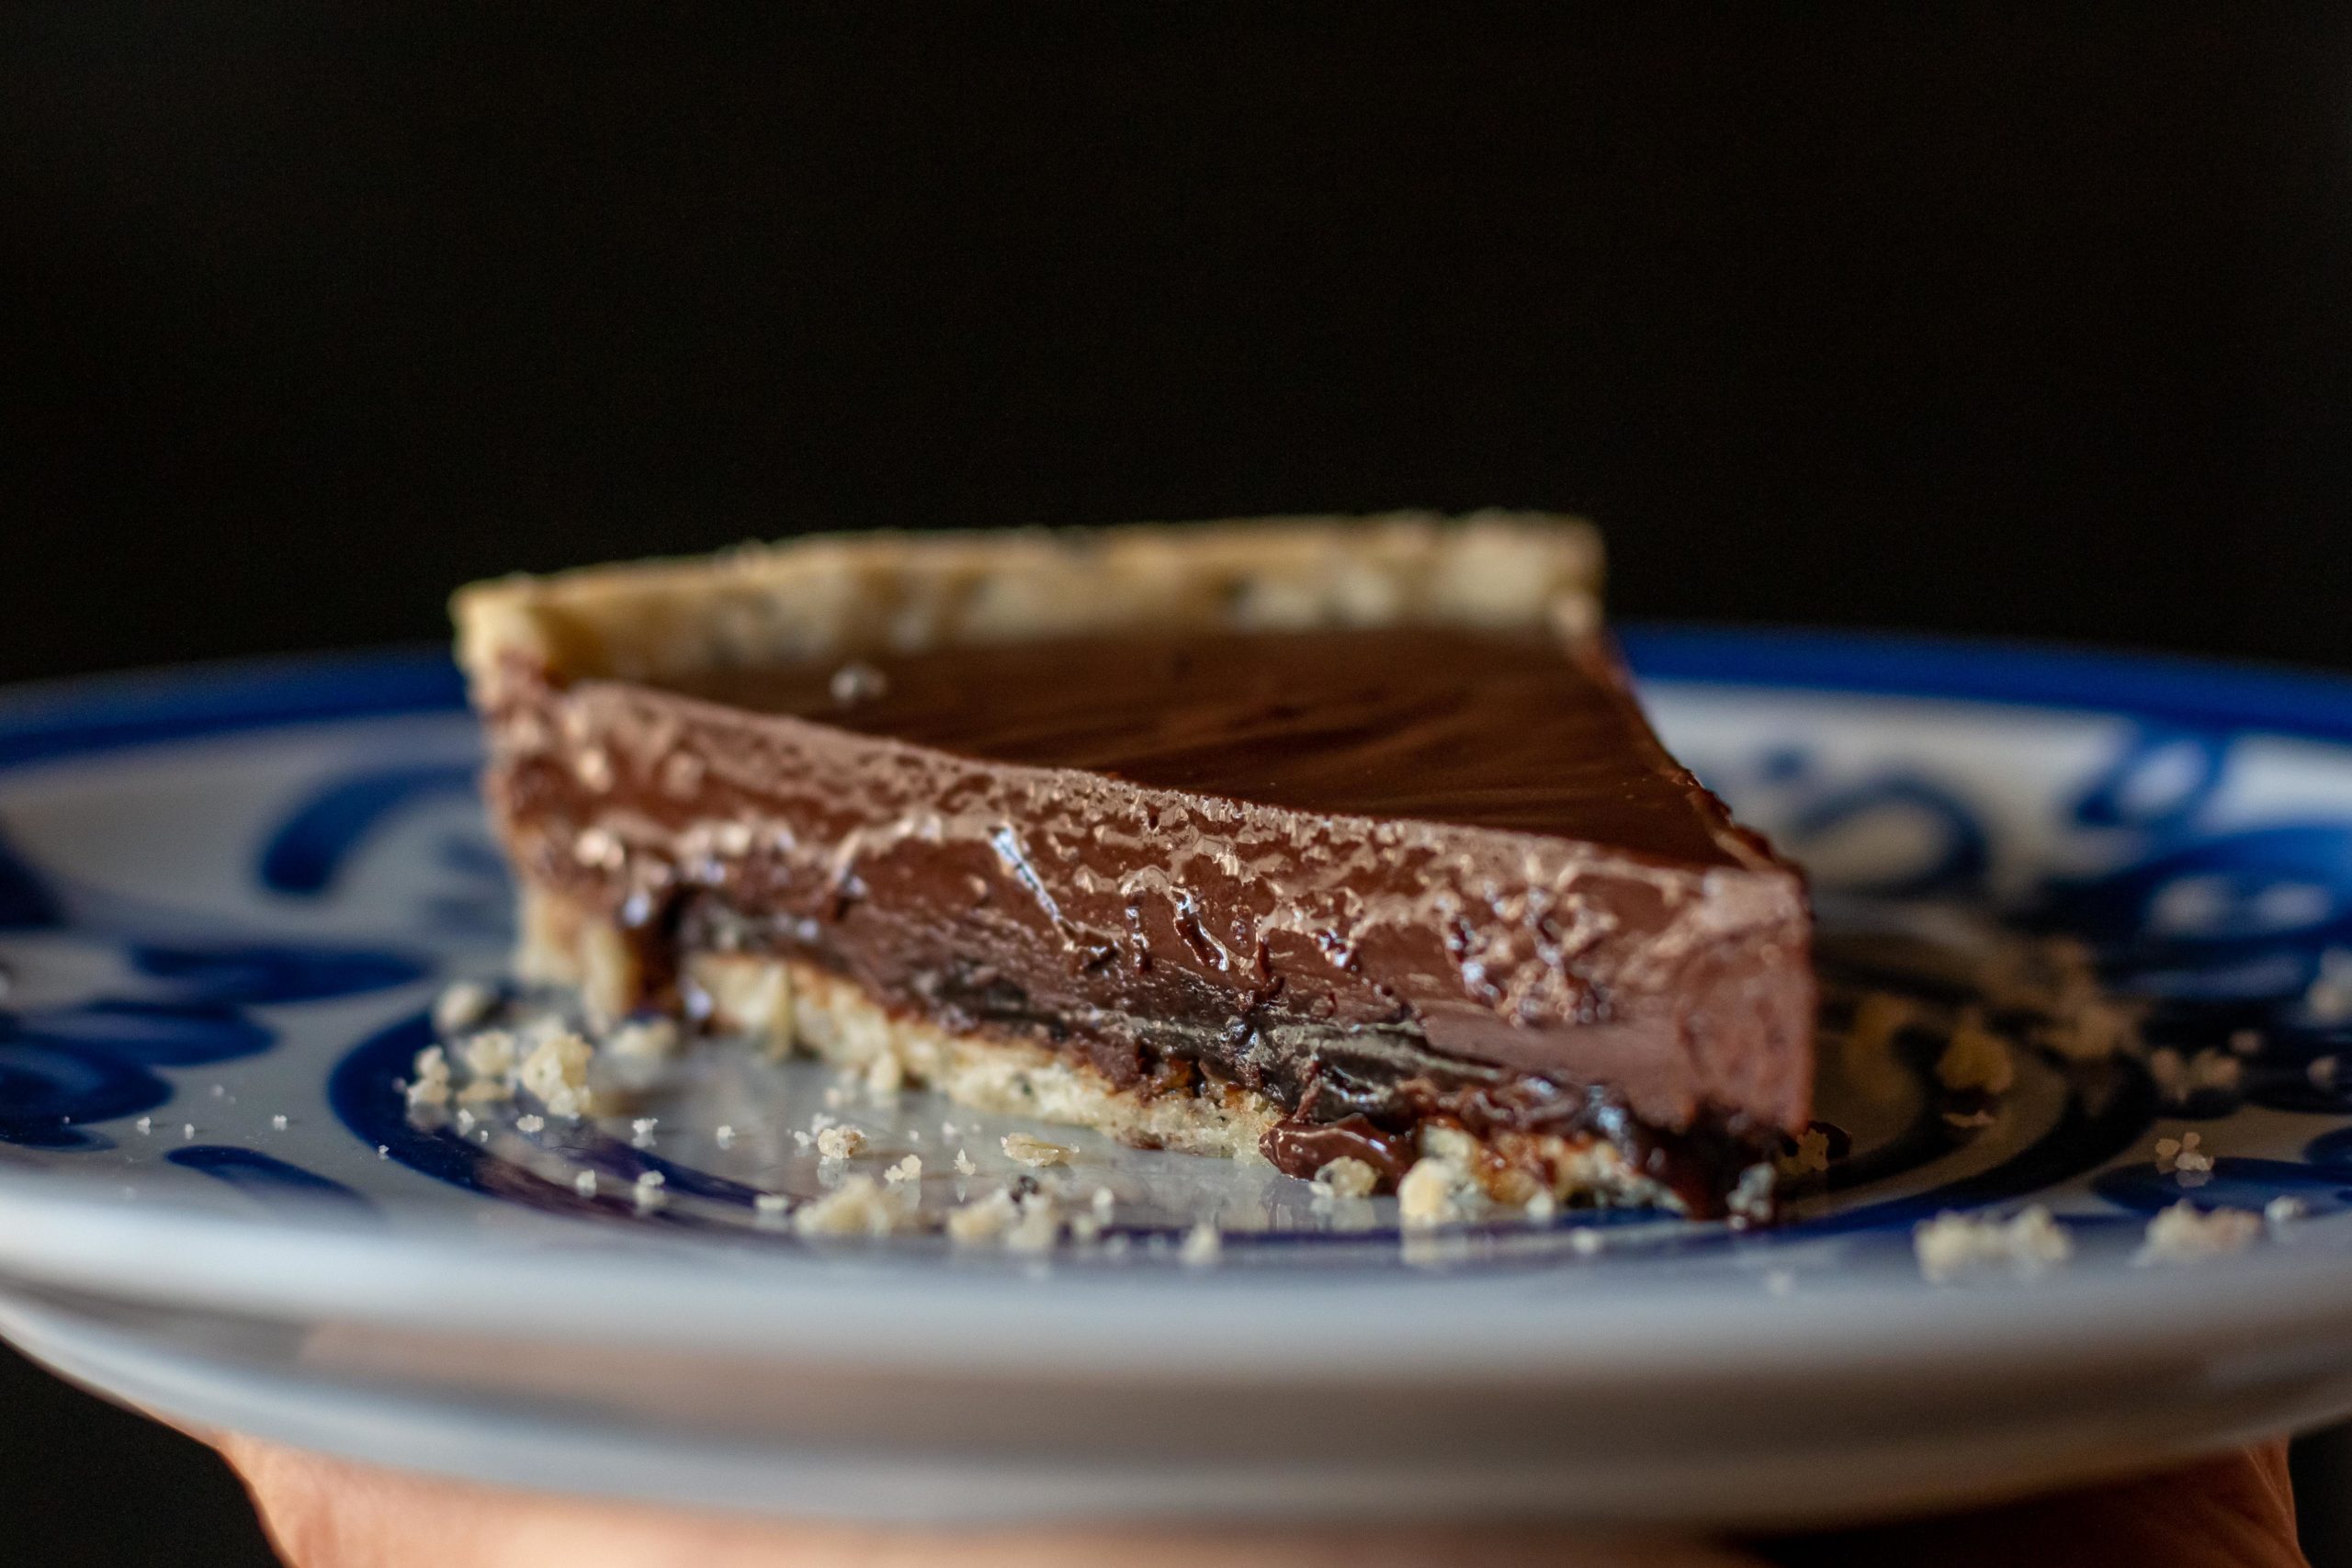 Slice of chocolate and olive oil tart on a blue and white plate